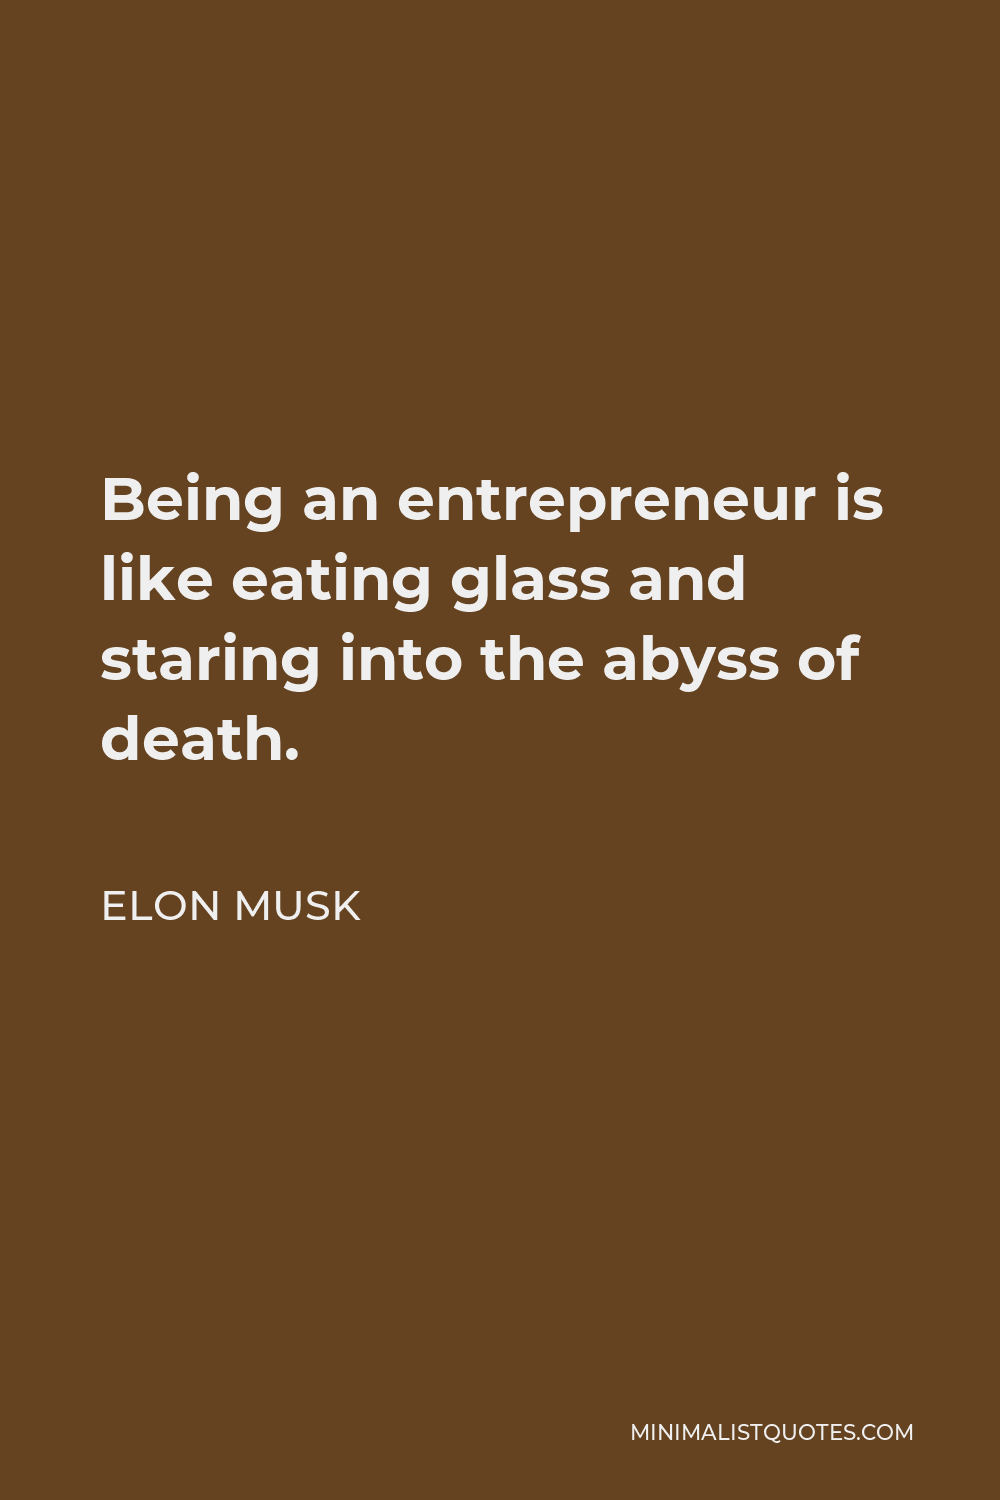 Elon Musk Quote - Being an entrepreneur is like eating glass and staring into the abyss of death.